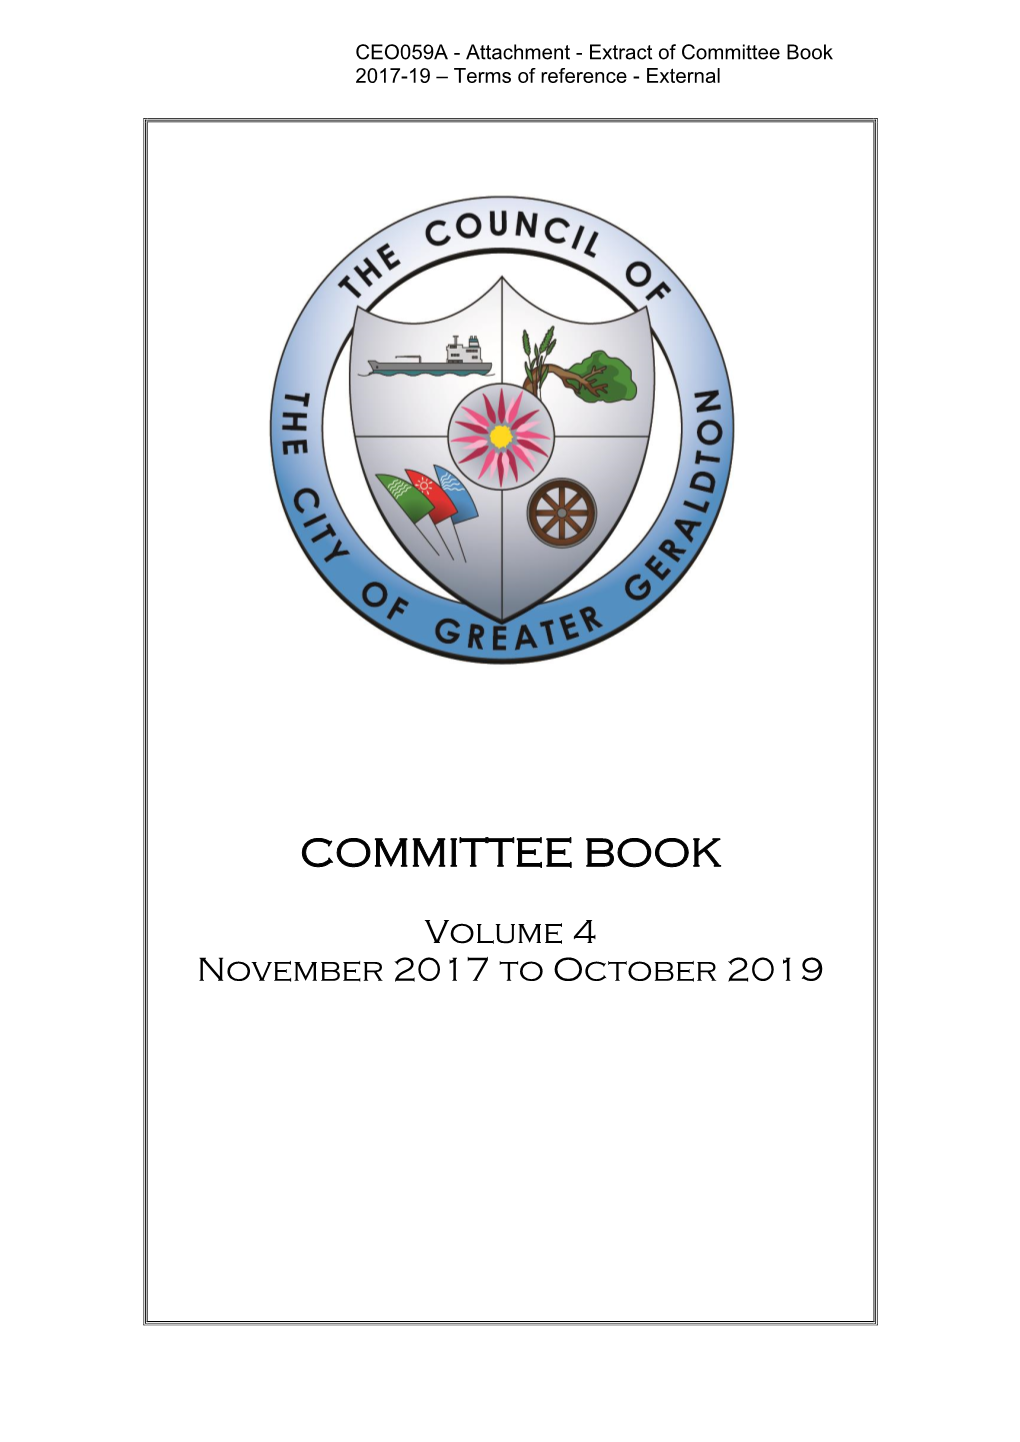 Committee Book